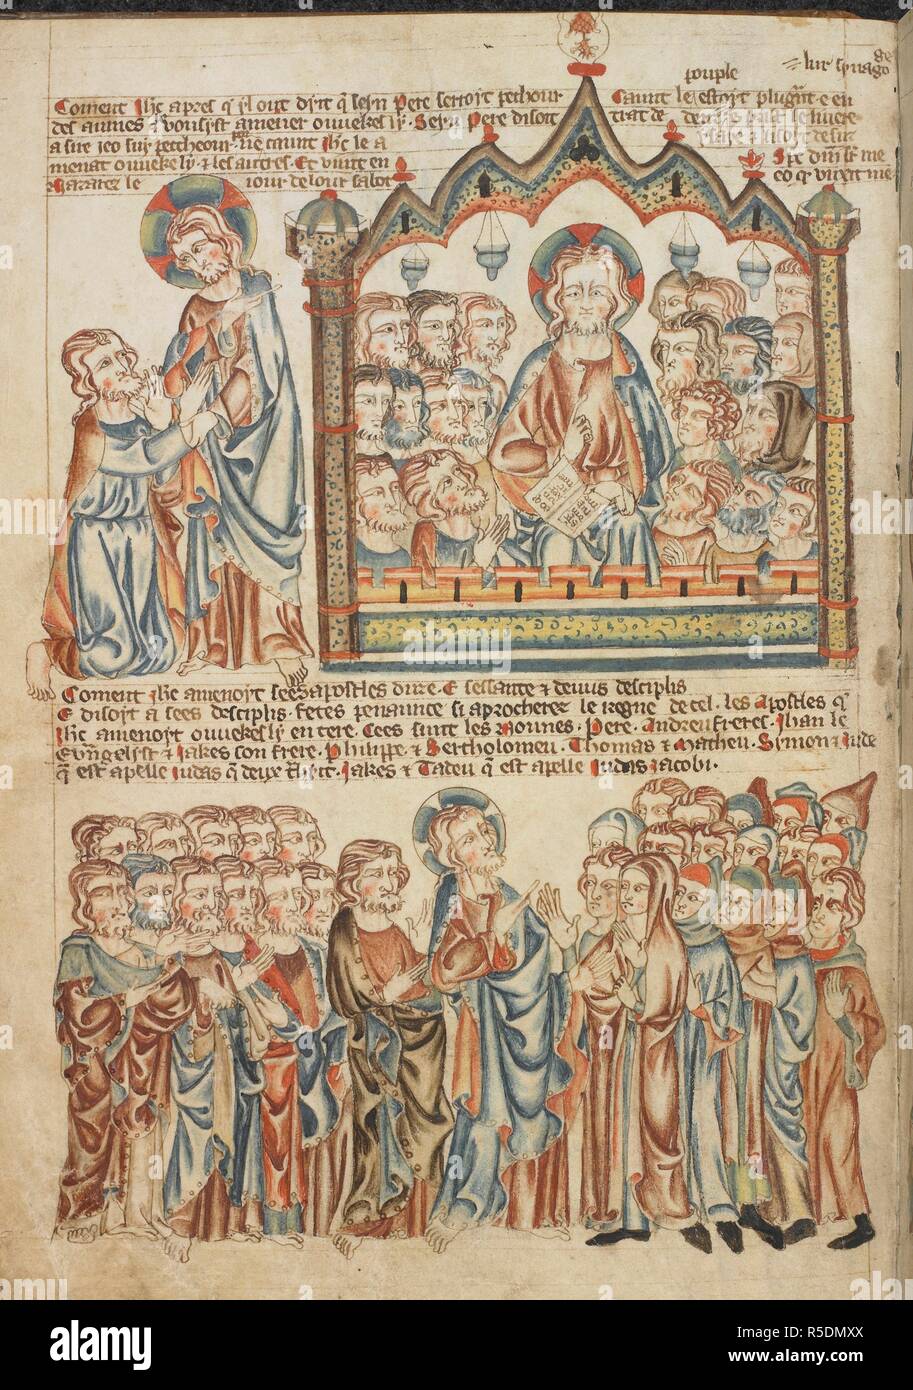 Christ charges St Peter to spread the Gospel; Christ reading in the synagogue; Christ and his twelve disciples, preaching to a crowd of followers, perhaps with St Mary Magdalene on the left. . Holkham Bible Picture Book. England, circa 1320-1330. Source: Add. 47682, f.22v. Stock Photo